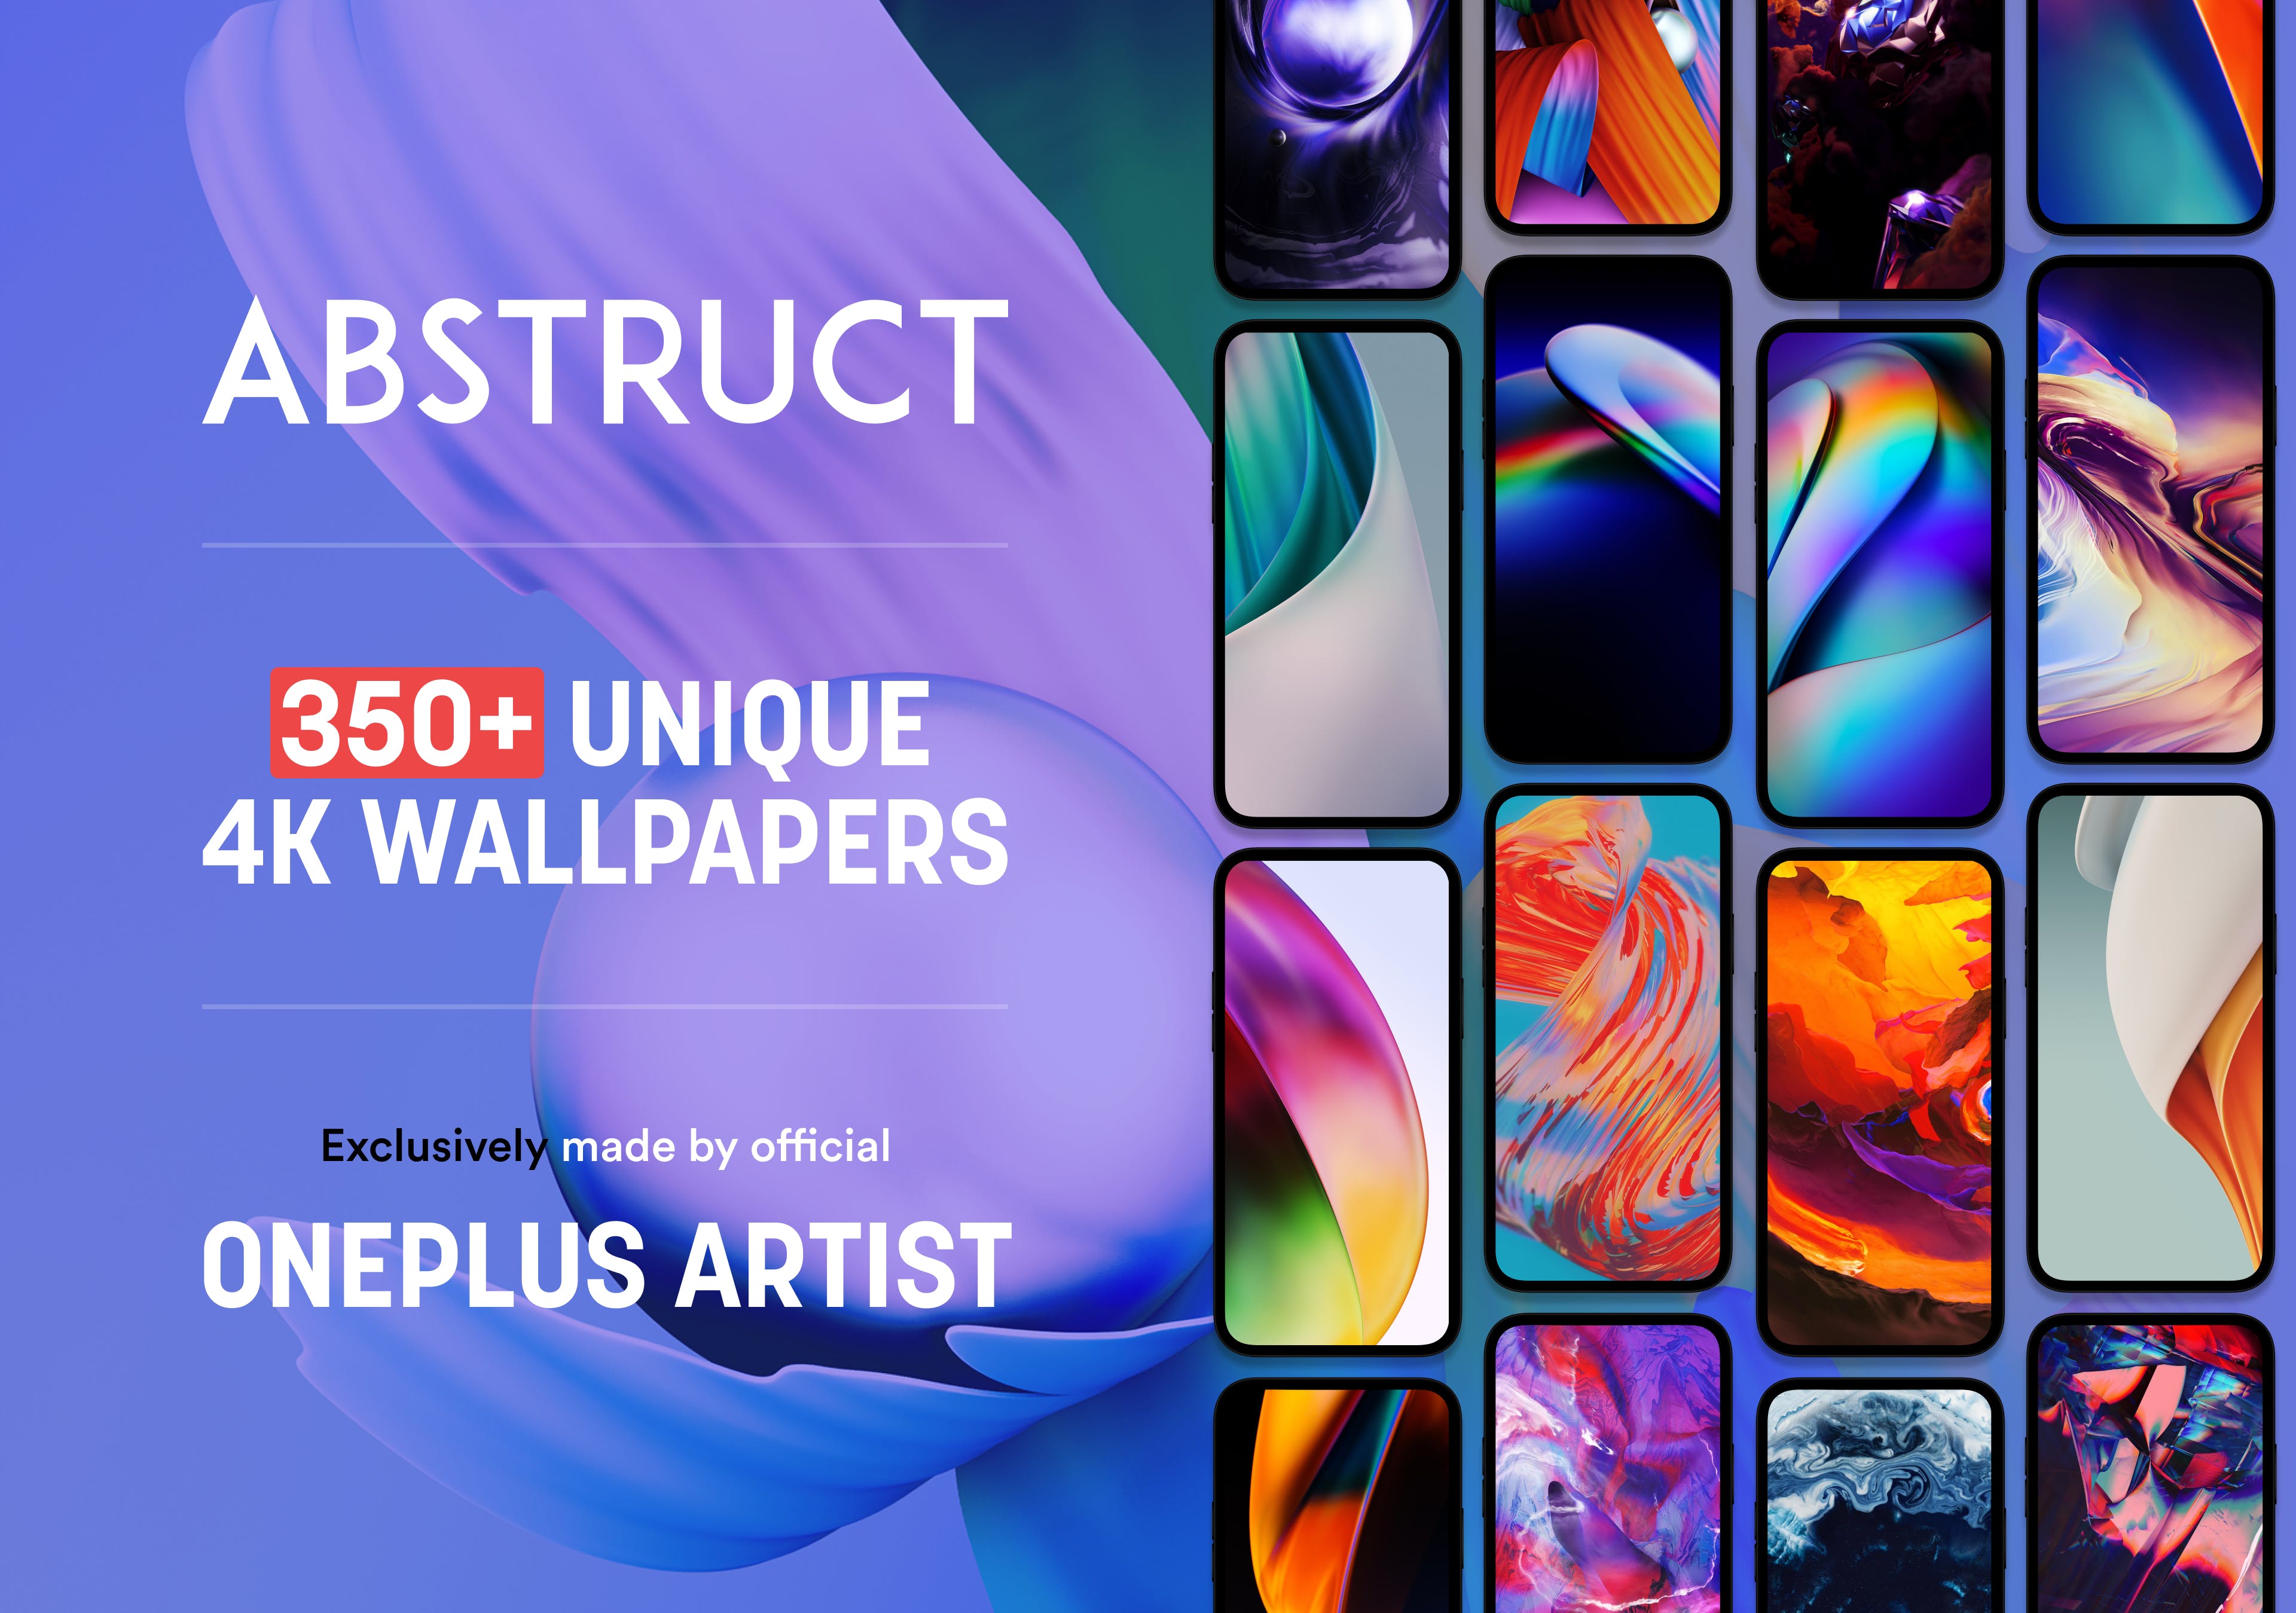 Abstruct 4K Wallpapers for iOS media 1